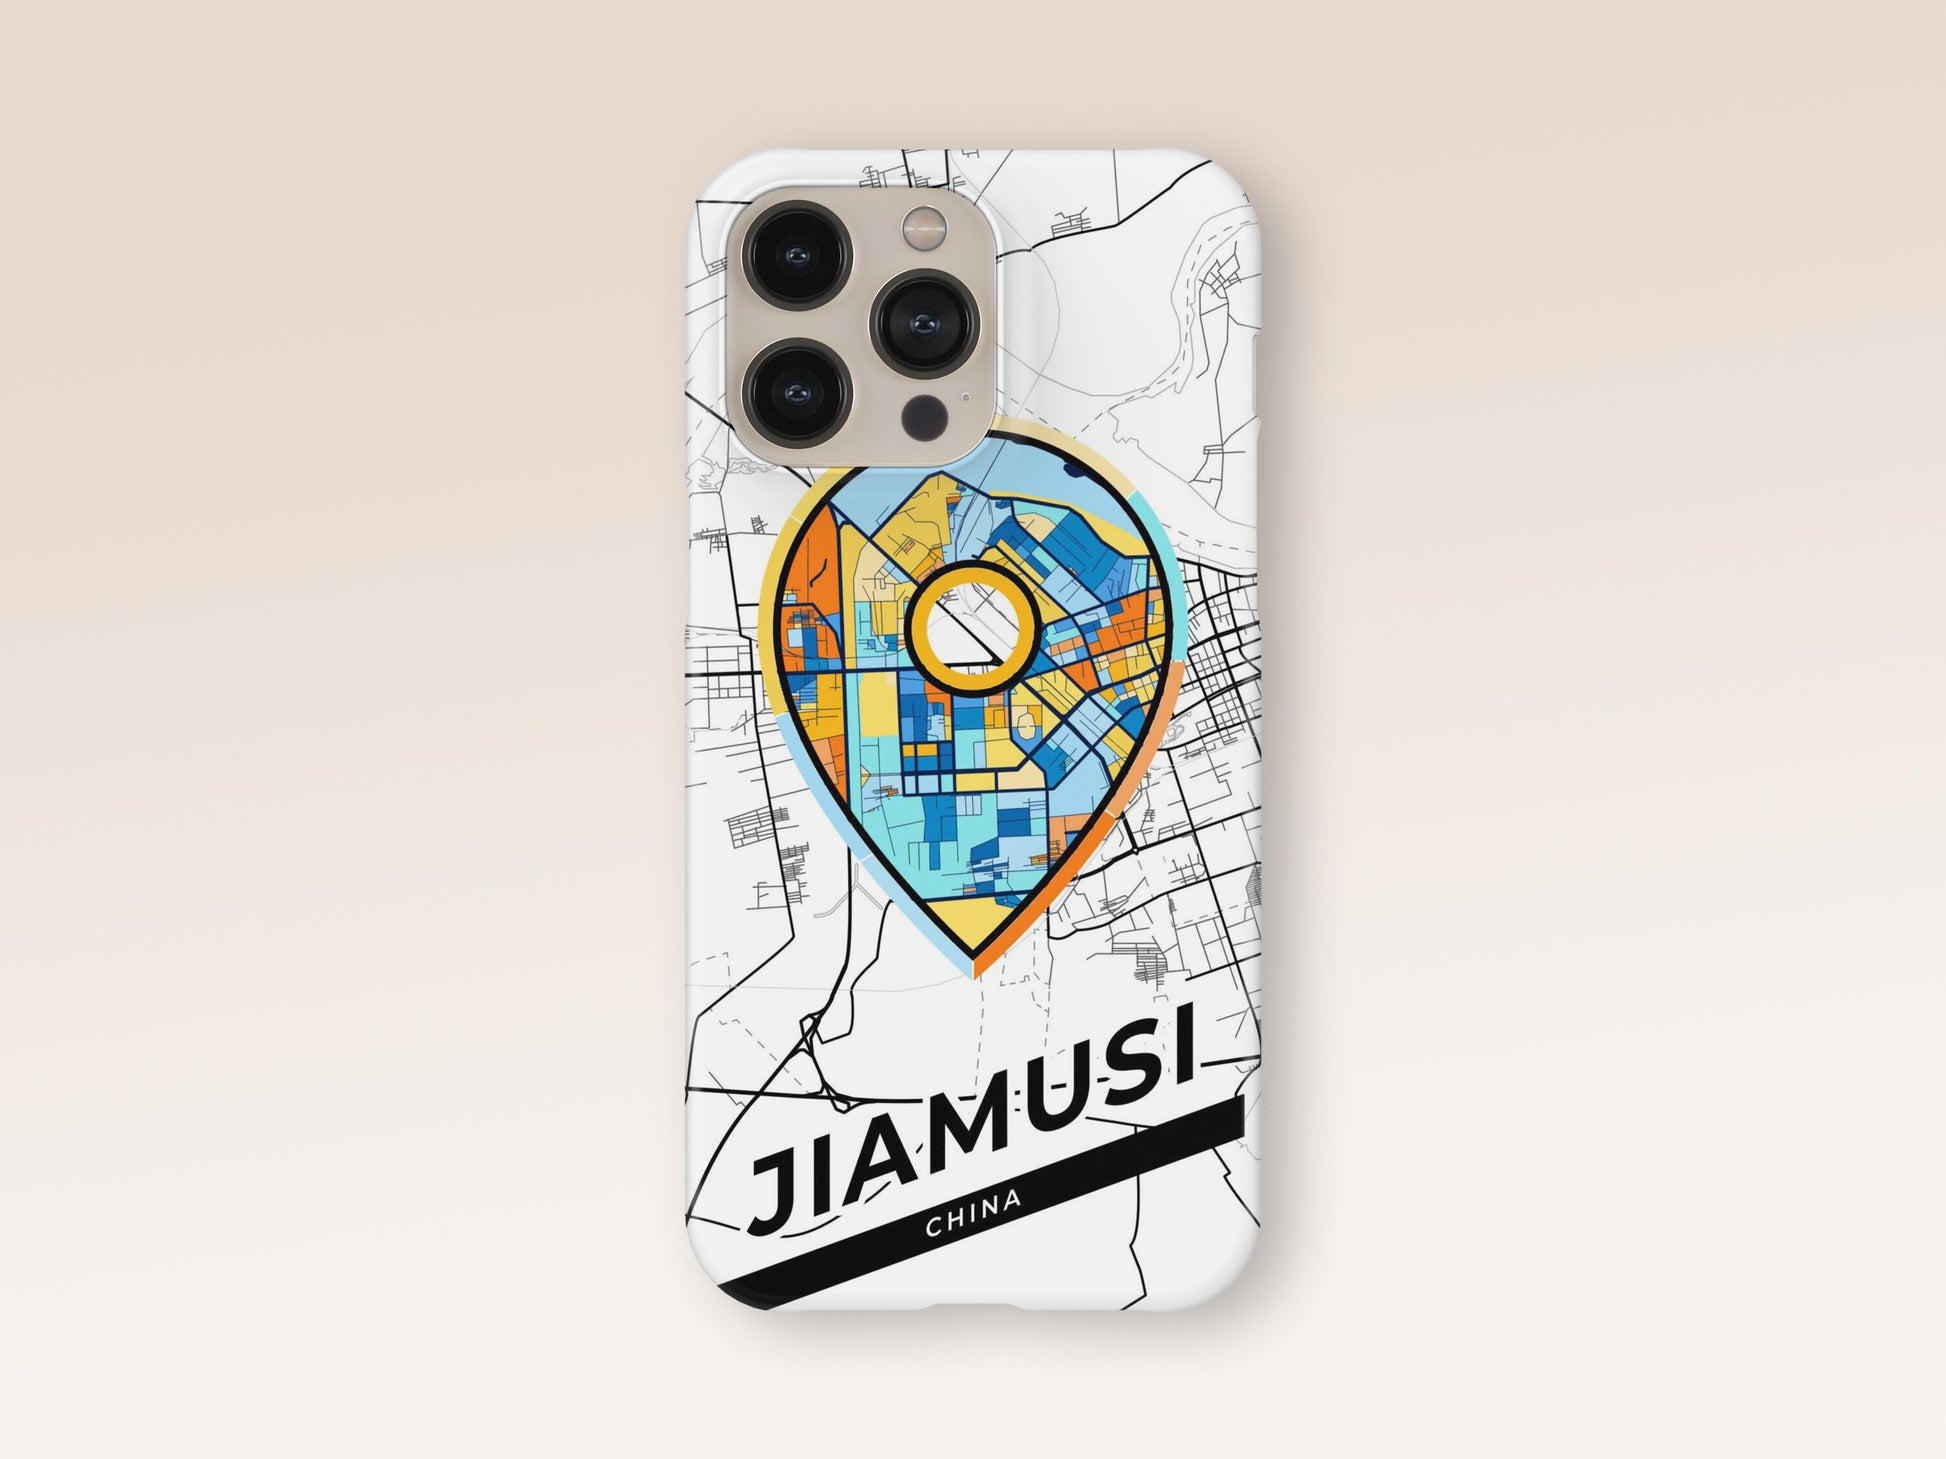 Jiamusi China slim phone case with colorful icon. Birthday, wedding or housewarming gift. Couple match cases. 1